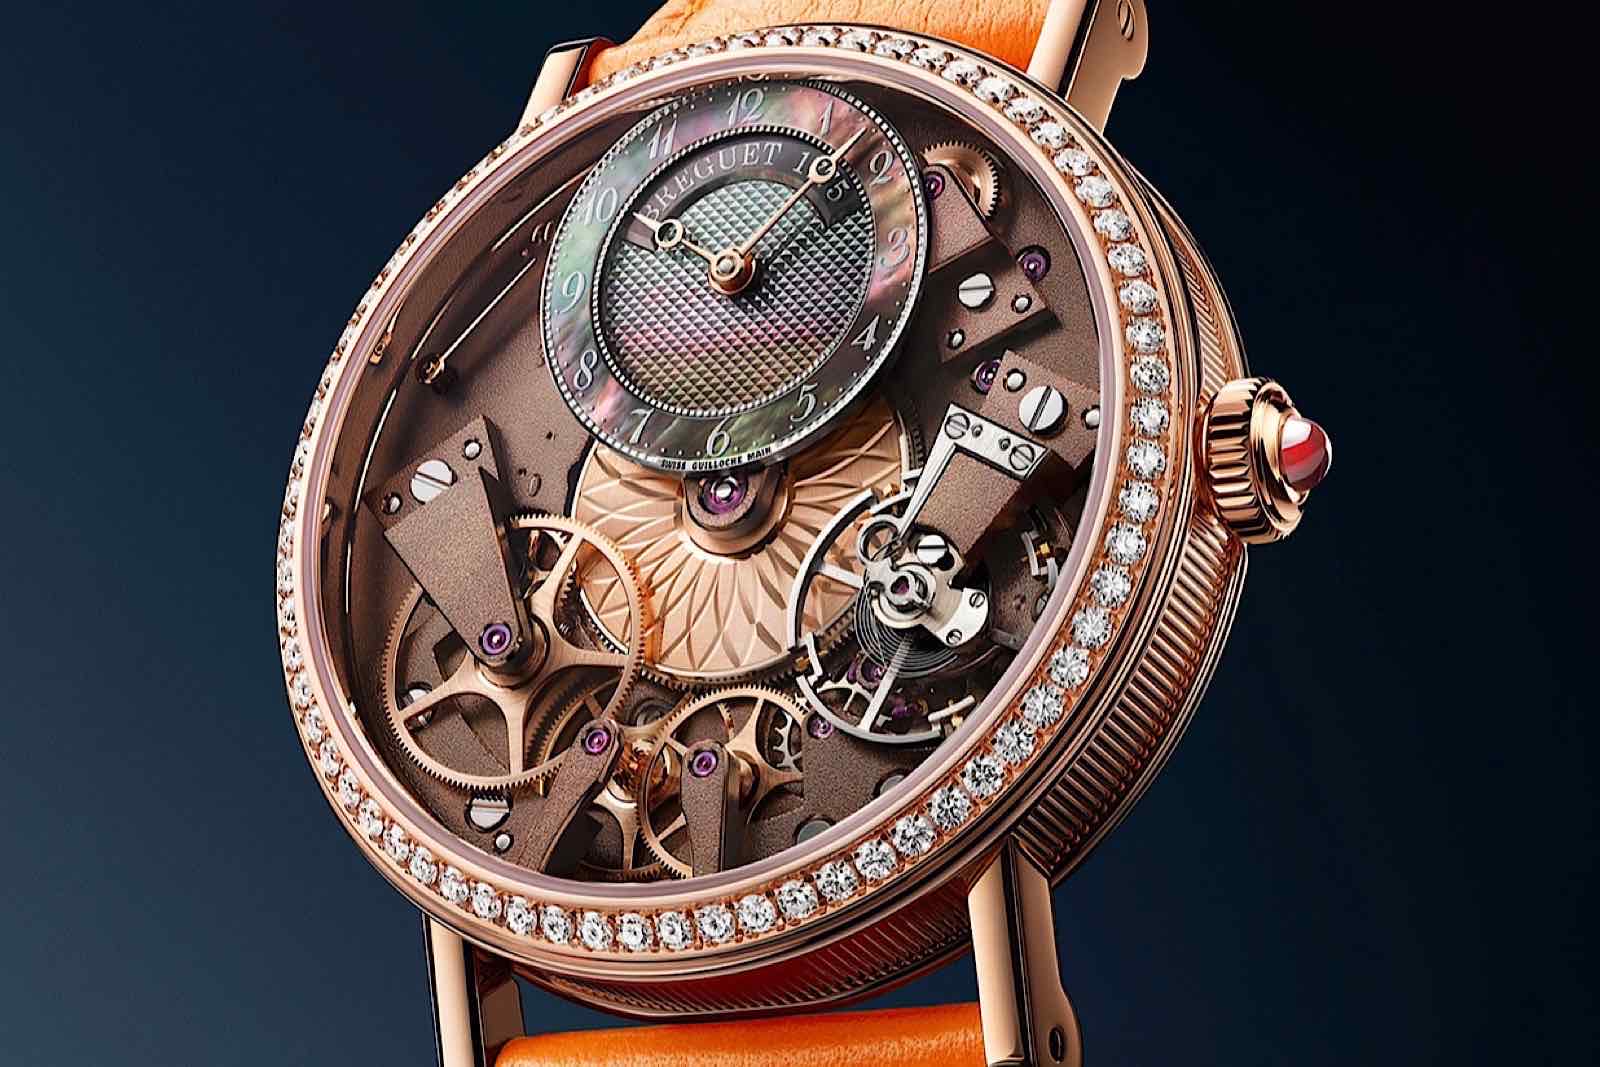 Breguet Introduces the Tradition Dame 7038 | SJX Watches